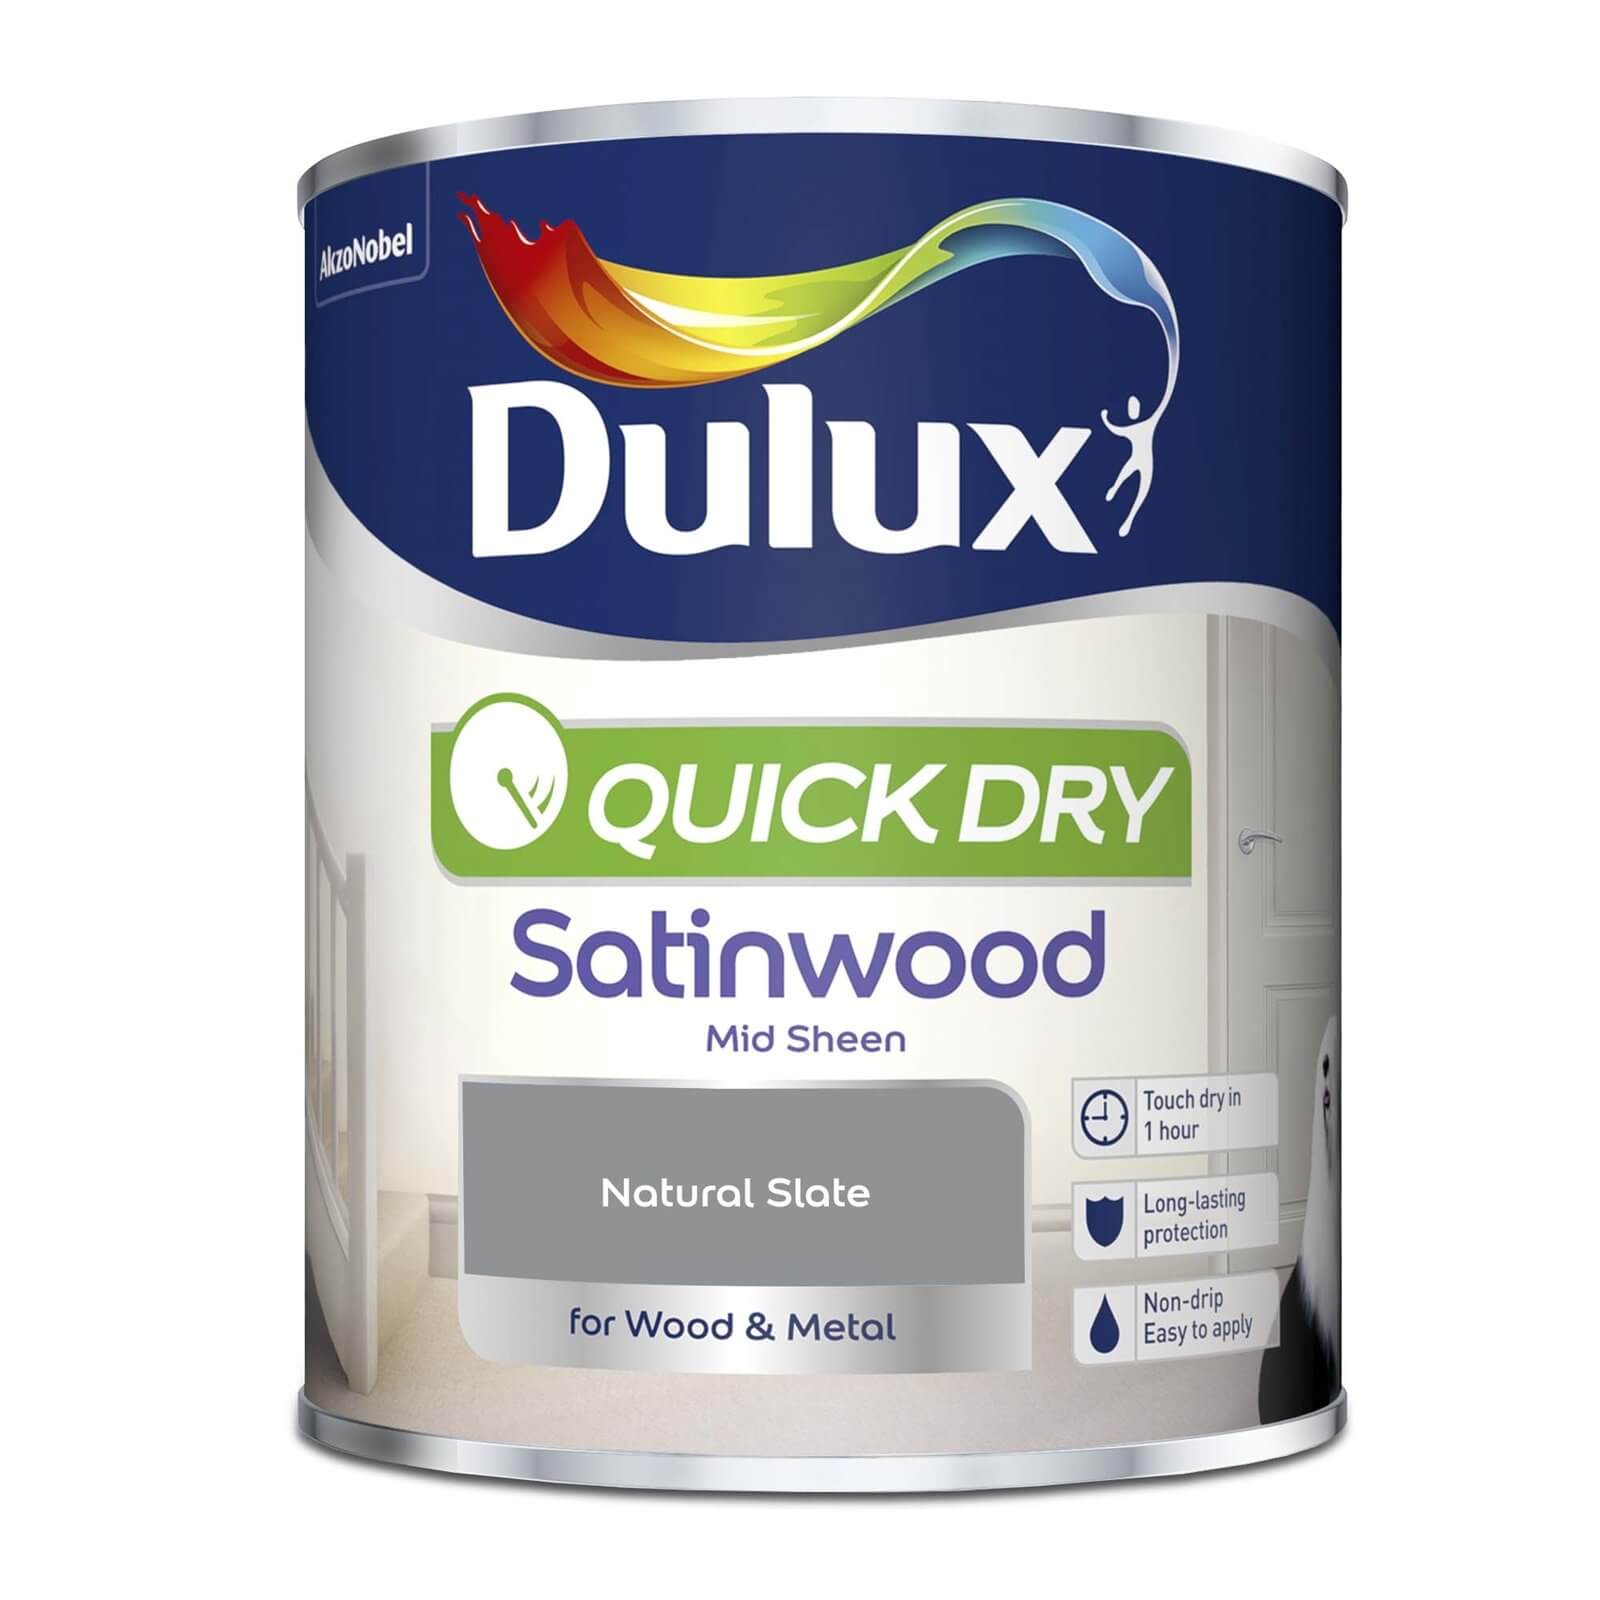 Dulux Quick Dry Satinwood Paint Natural Slate - 750ml